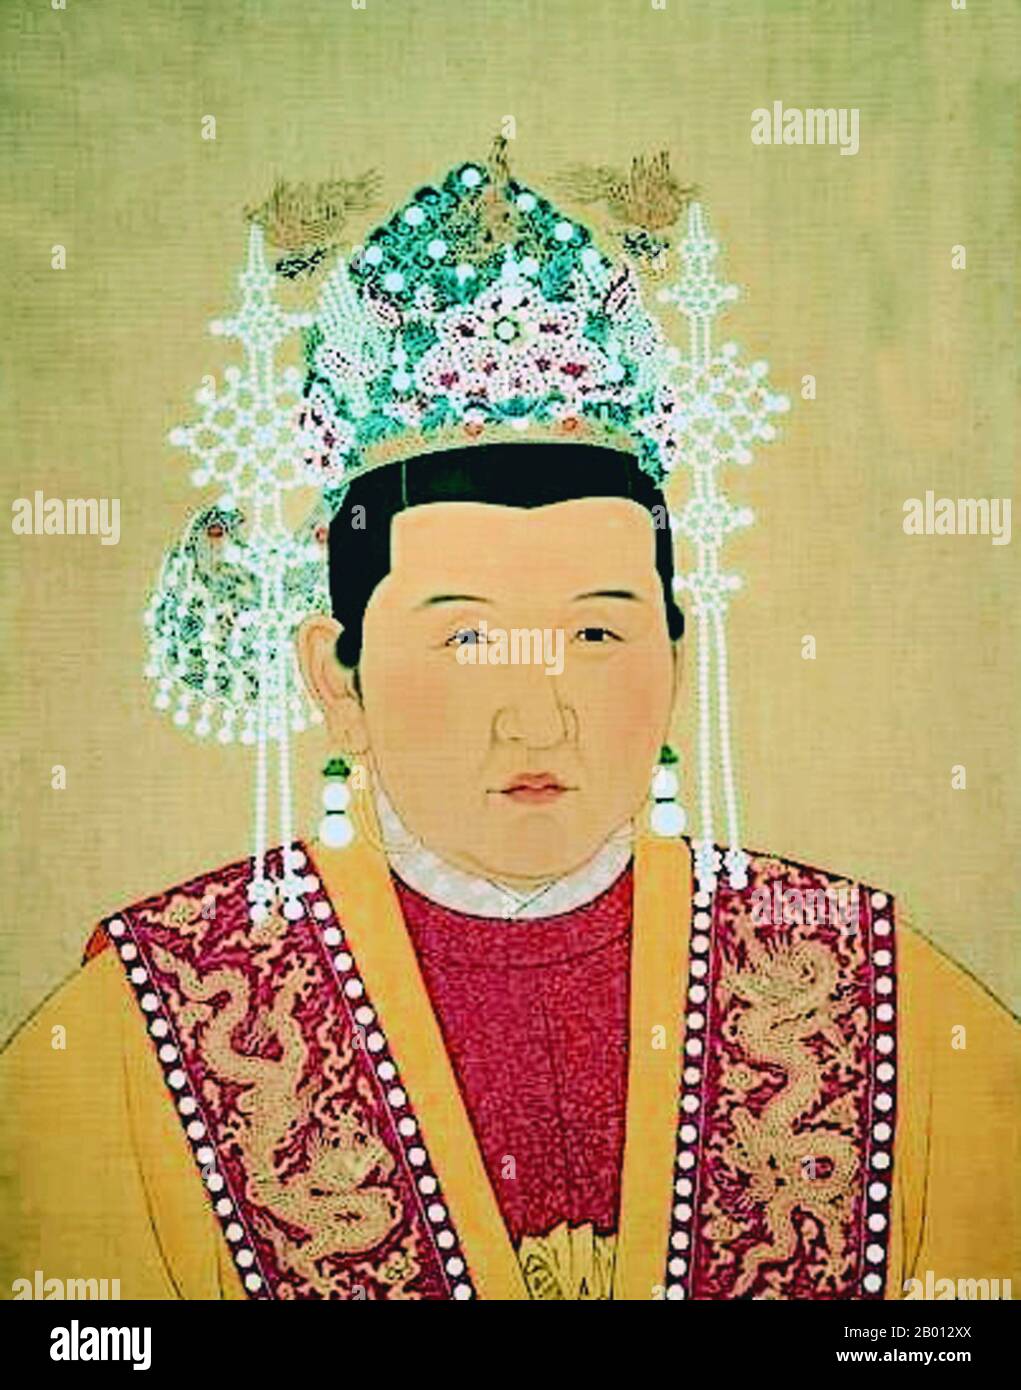 China: Empress Xiao Ci Gao (1332-1382), consort of the 1st Ming Emperor, c. 14th-17th century.  Empress Xiaocigao (1332-1382), also known as Empress Ma, was the consort of the 1st Ming Emperor Hongwu (r. 1368-1398) and mother of the 3rd Ming Emperor Yongle (r. 1402-1424). From a poor background, she married the future emperor while he was but an officer in the Red Turban Army, accompanying him on campaigns and managing his affairs.   When her husband became emperor, Xiaocigao acted as Hongwu's political advisor and secretary, and held a great deal of influence during his reign. Stock Photo